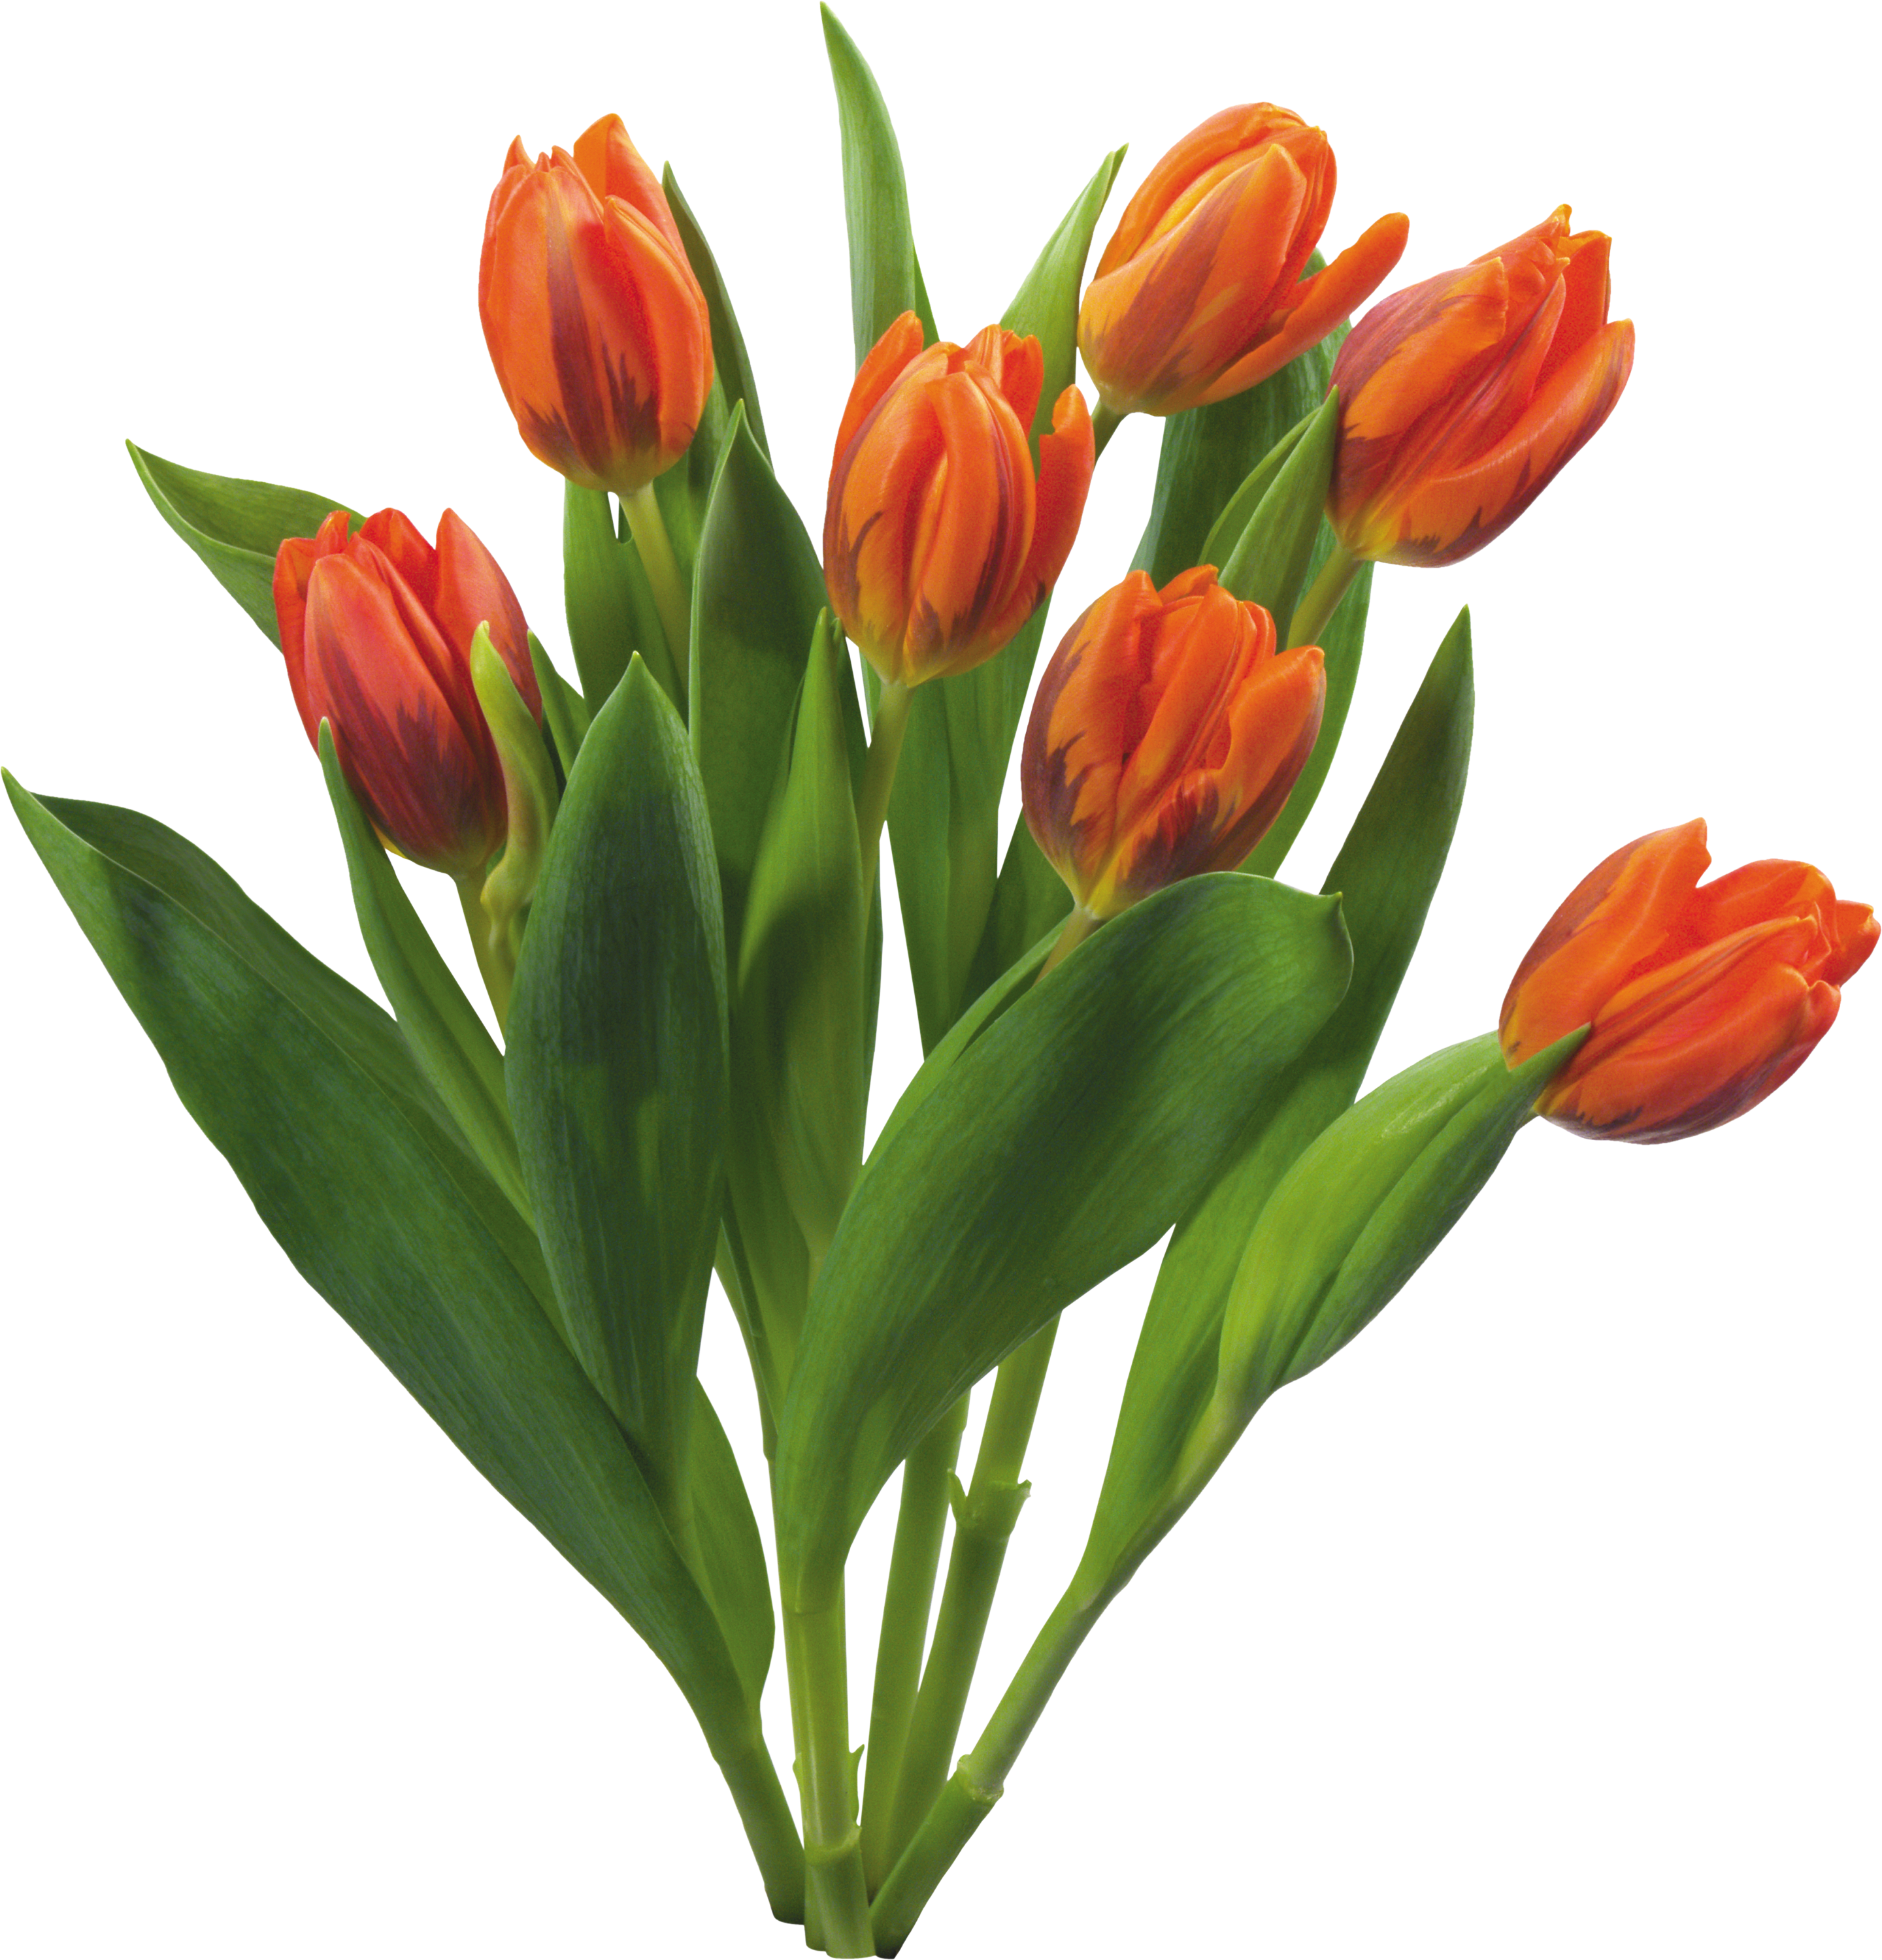 Bouquet of flowers PNG image free Download